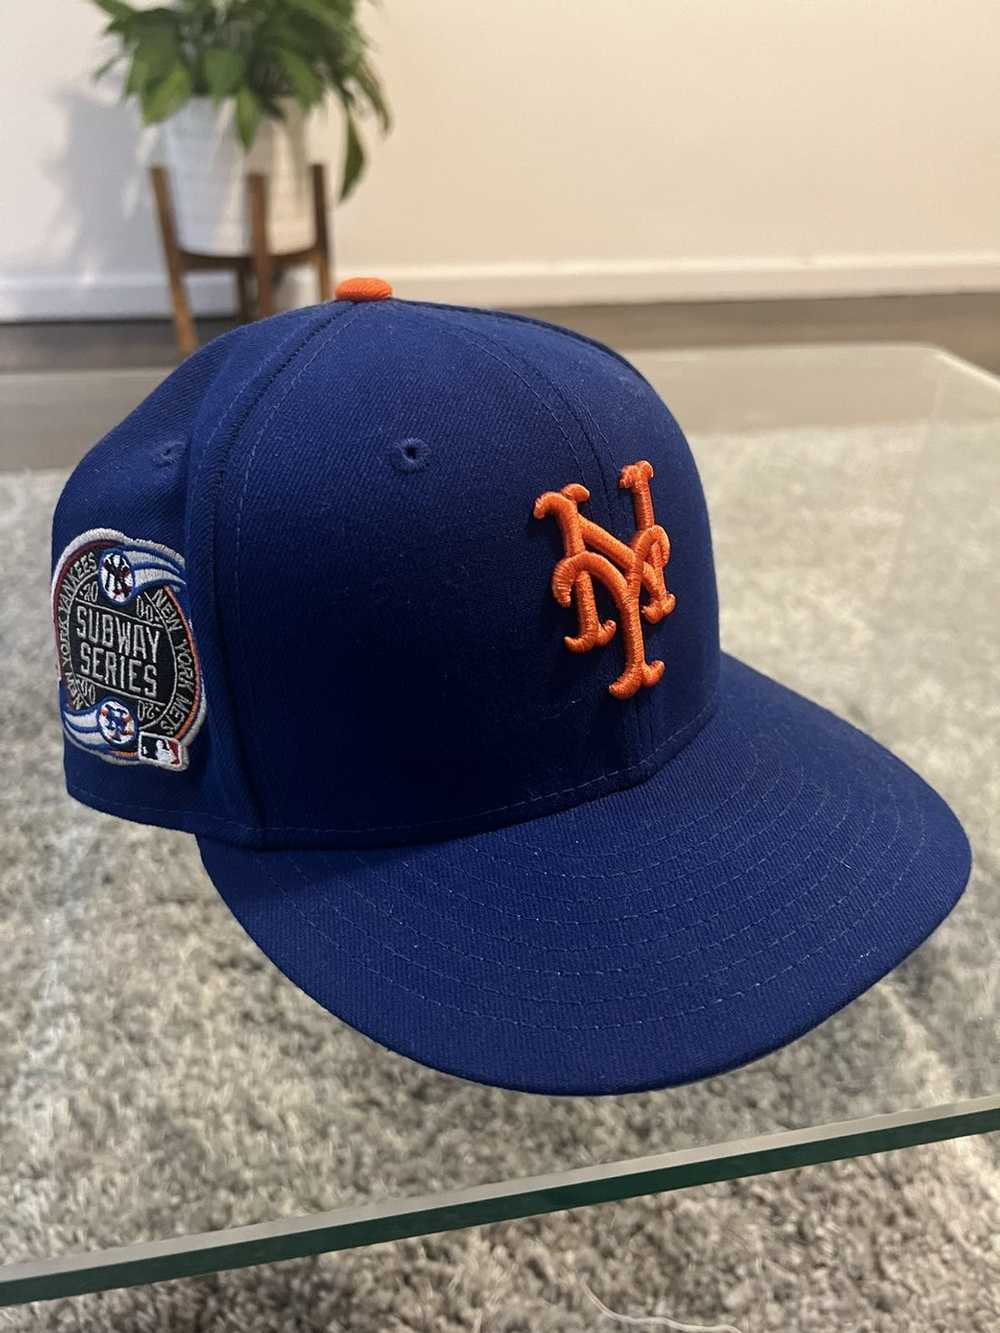 🏆 - Andy on X: April 19th of #30Teamsin30Days are the New York Mets 2015  World Series alternate jersey, with the game 5 Diamond Era cap #Mets  #NewYork #LGM #NYM #Baseball #MLB #